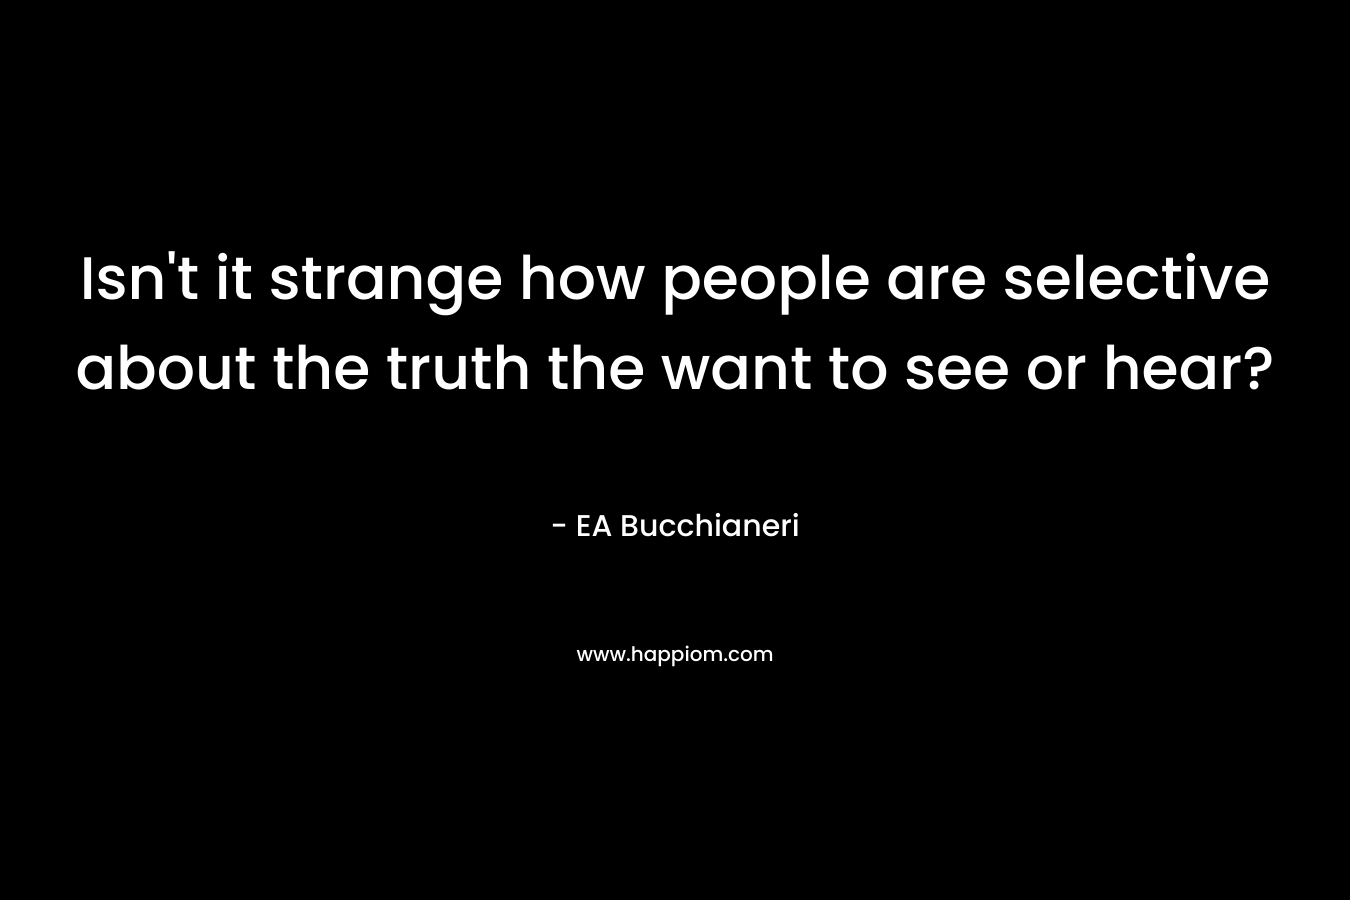 Isn’t it strange how people are selective about the truth the want to see or hear? – EA Bucchianeri